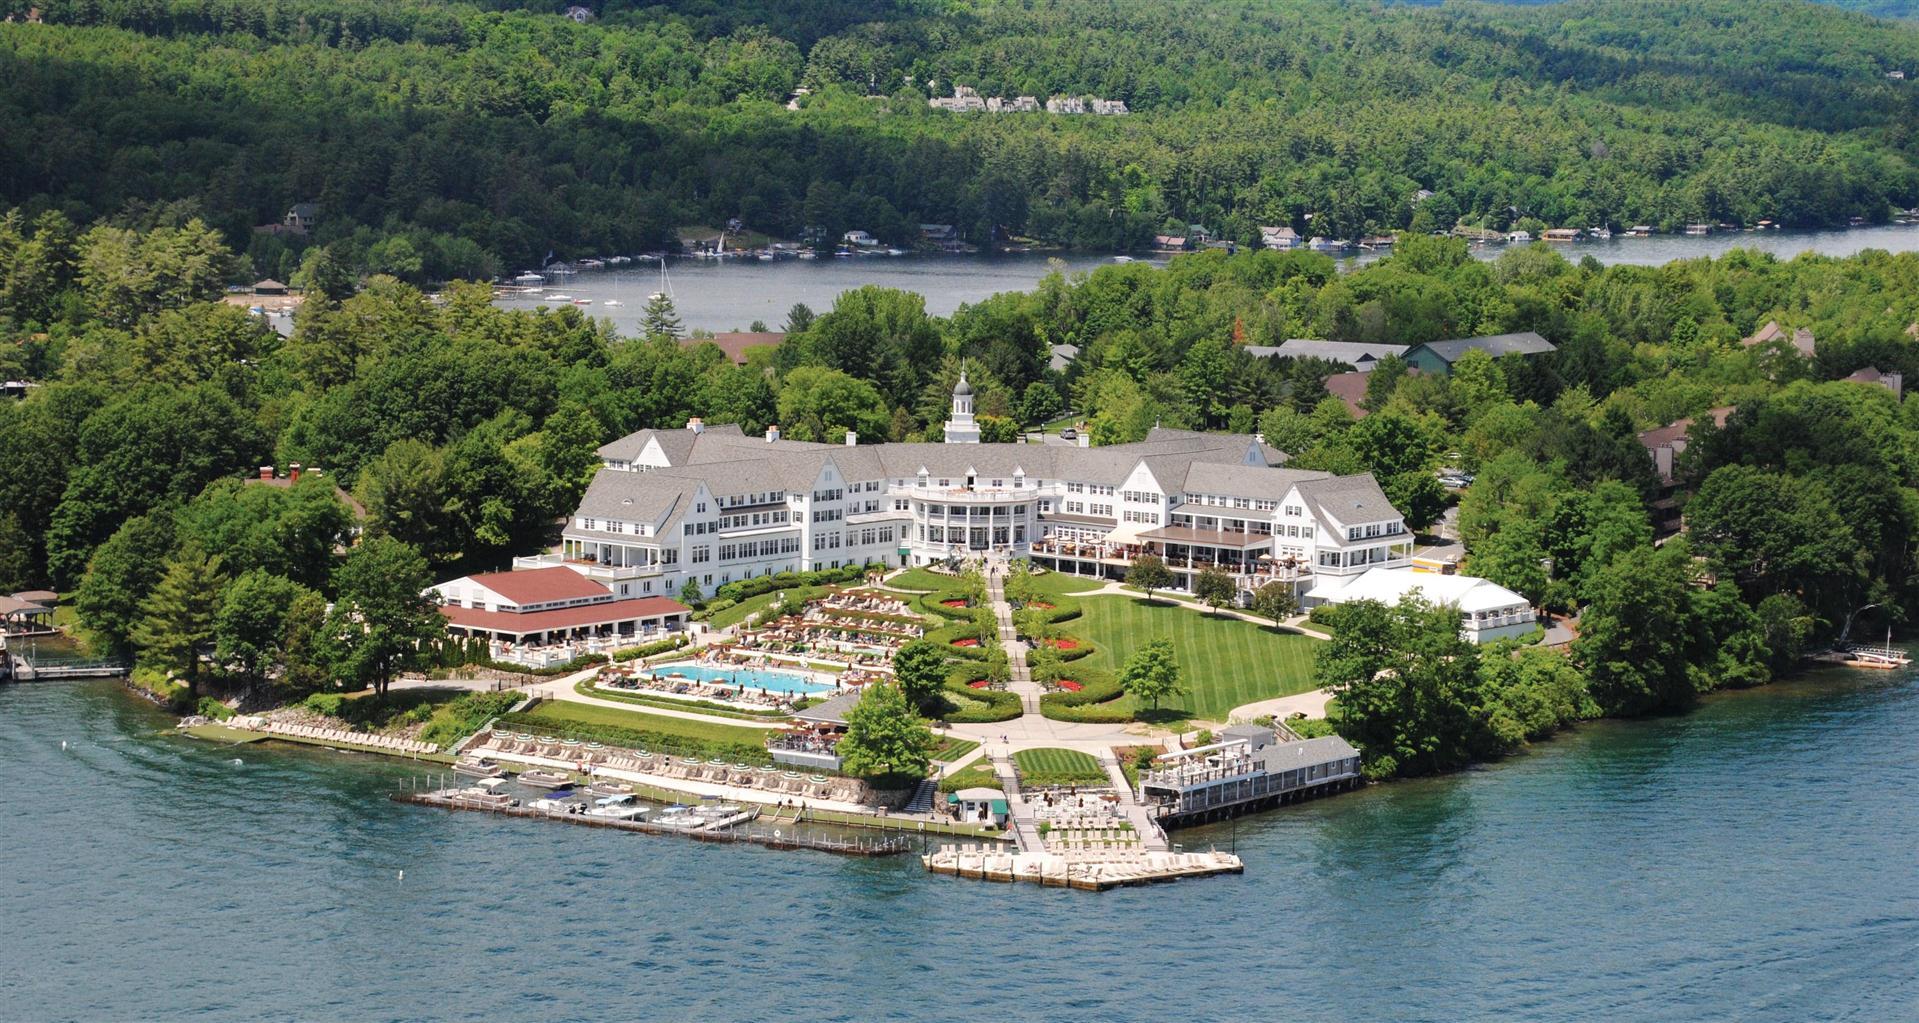 The Sagamore Resort on Lake George in Bolton Landing, NY